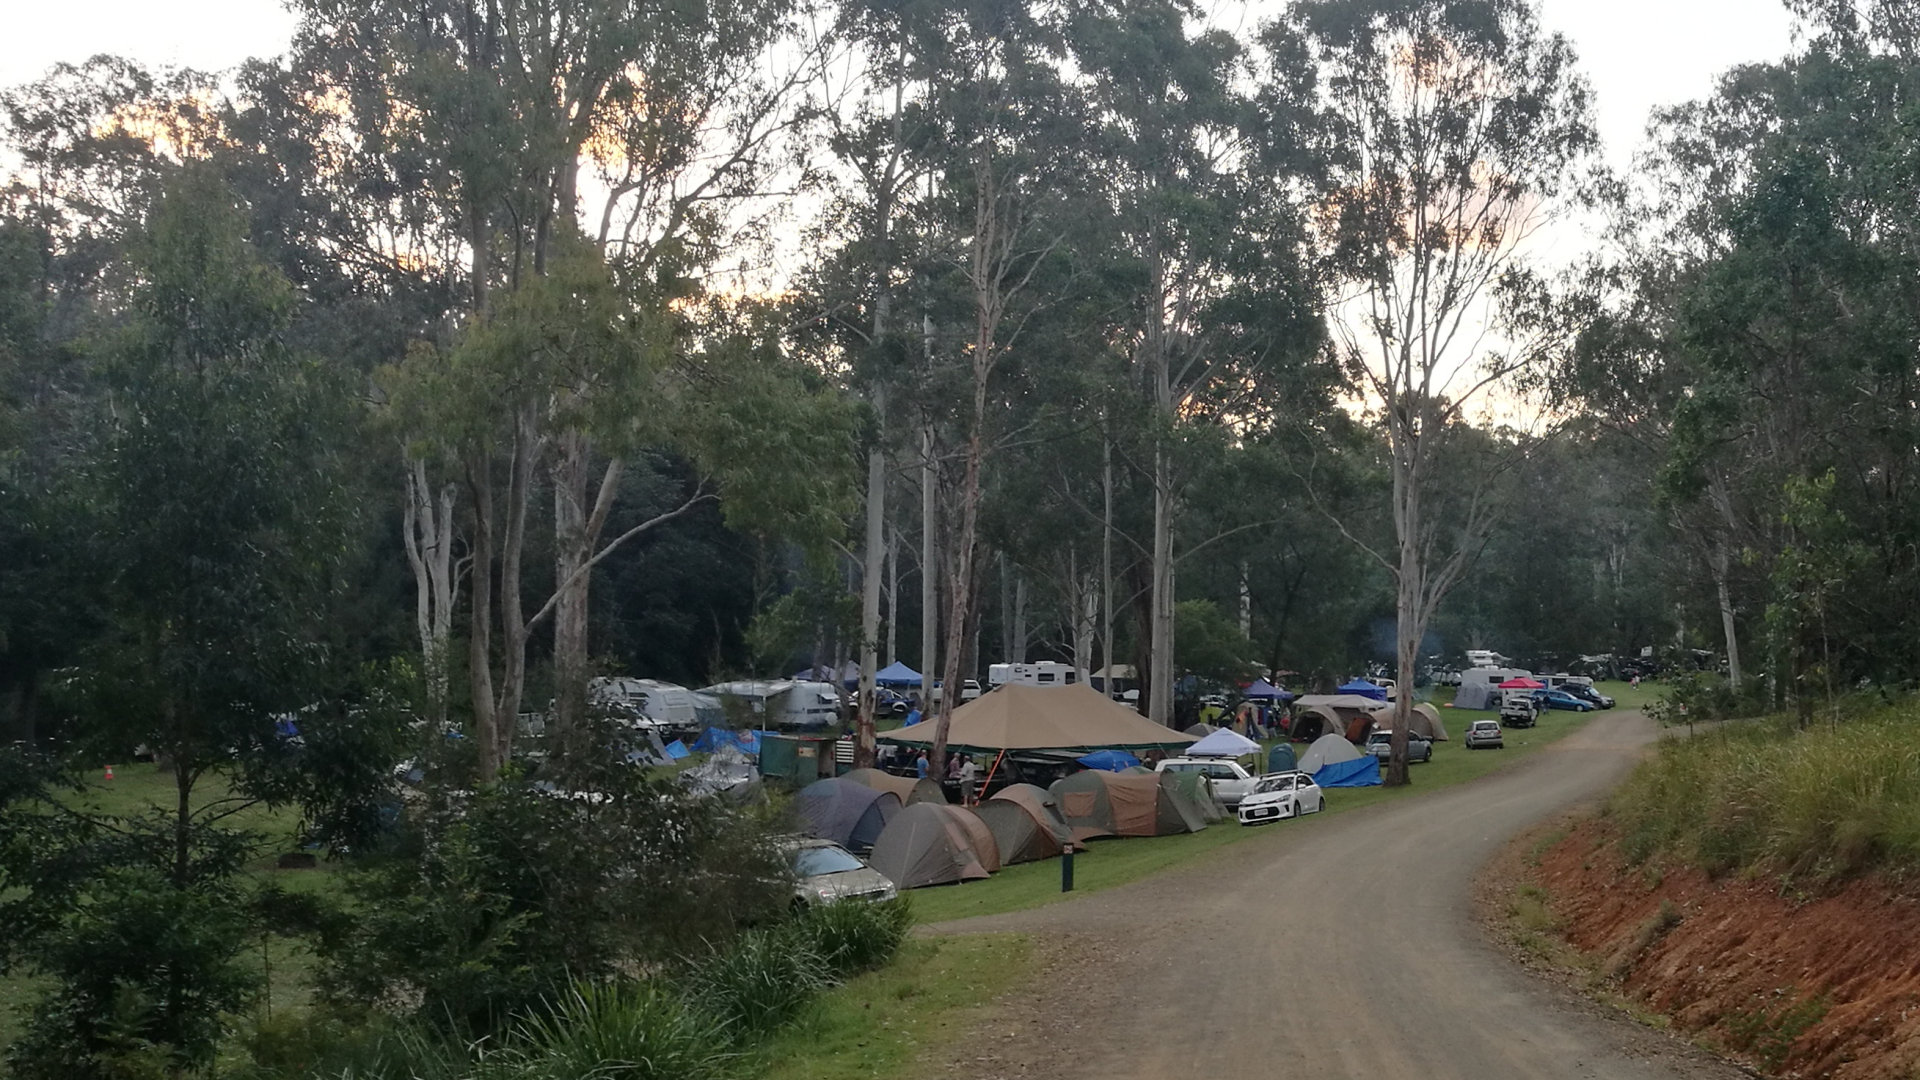 Camping grounds at Peach Trees, a camping ground in the Jimna State Forest along Yabba Creek. Growing fruit trees near forestry camps used to be common, and peach trees growing around the camping area are remnants from this practise.